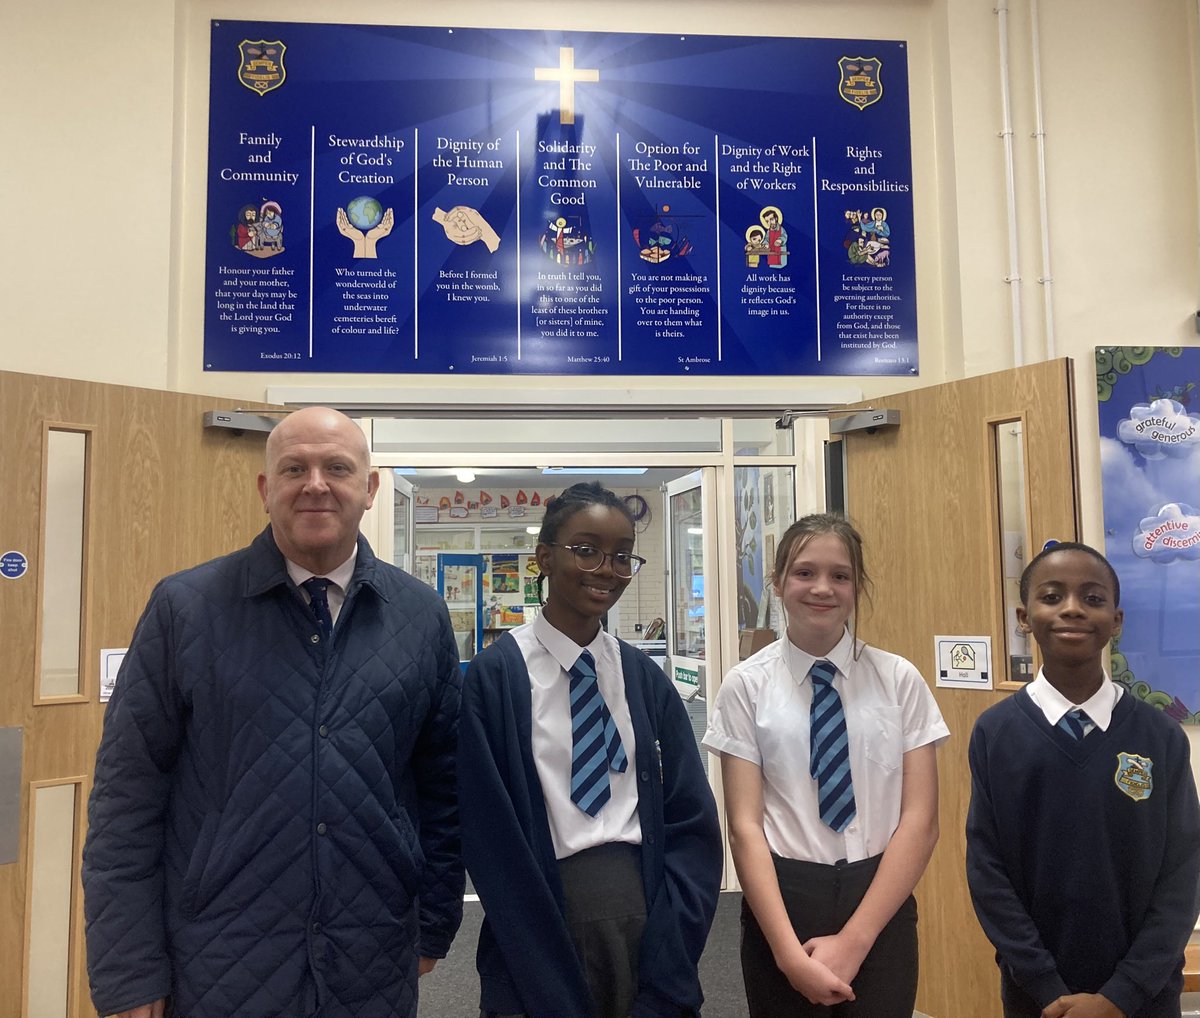 Our Faith Ambassadors were able to thank Steve Martin for the fabulous new signage @schoolsignscouk have fitted around @LittleStFrancis recently. They all look great including the #CatholicSocialTeaching display seen here. @BCPP__ @BhamDES @RCBirmingham #CatholicLife #ThankYou